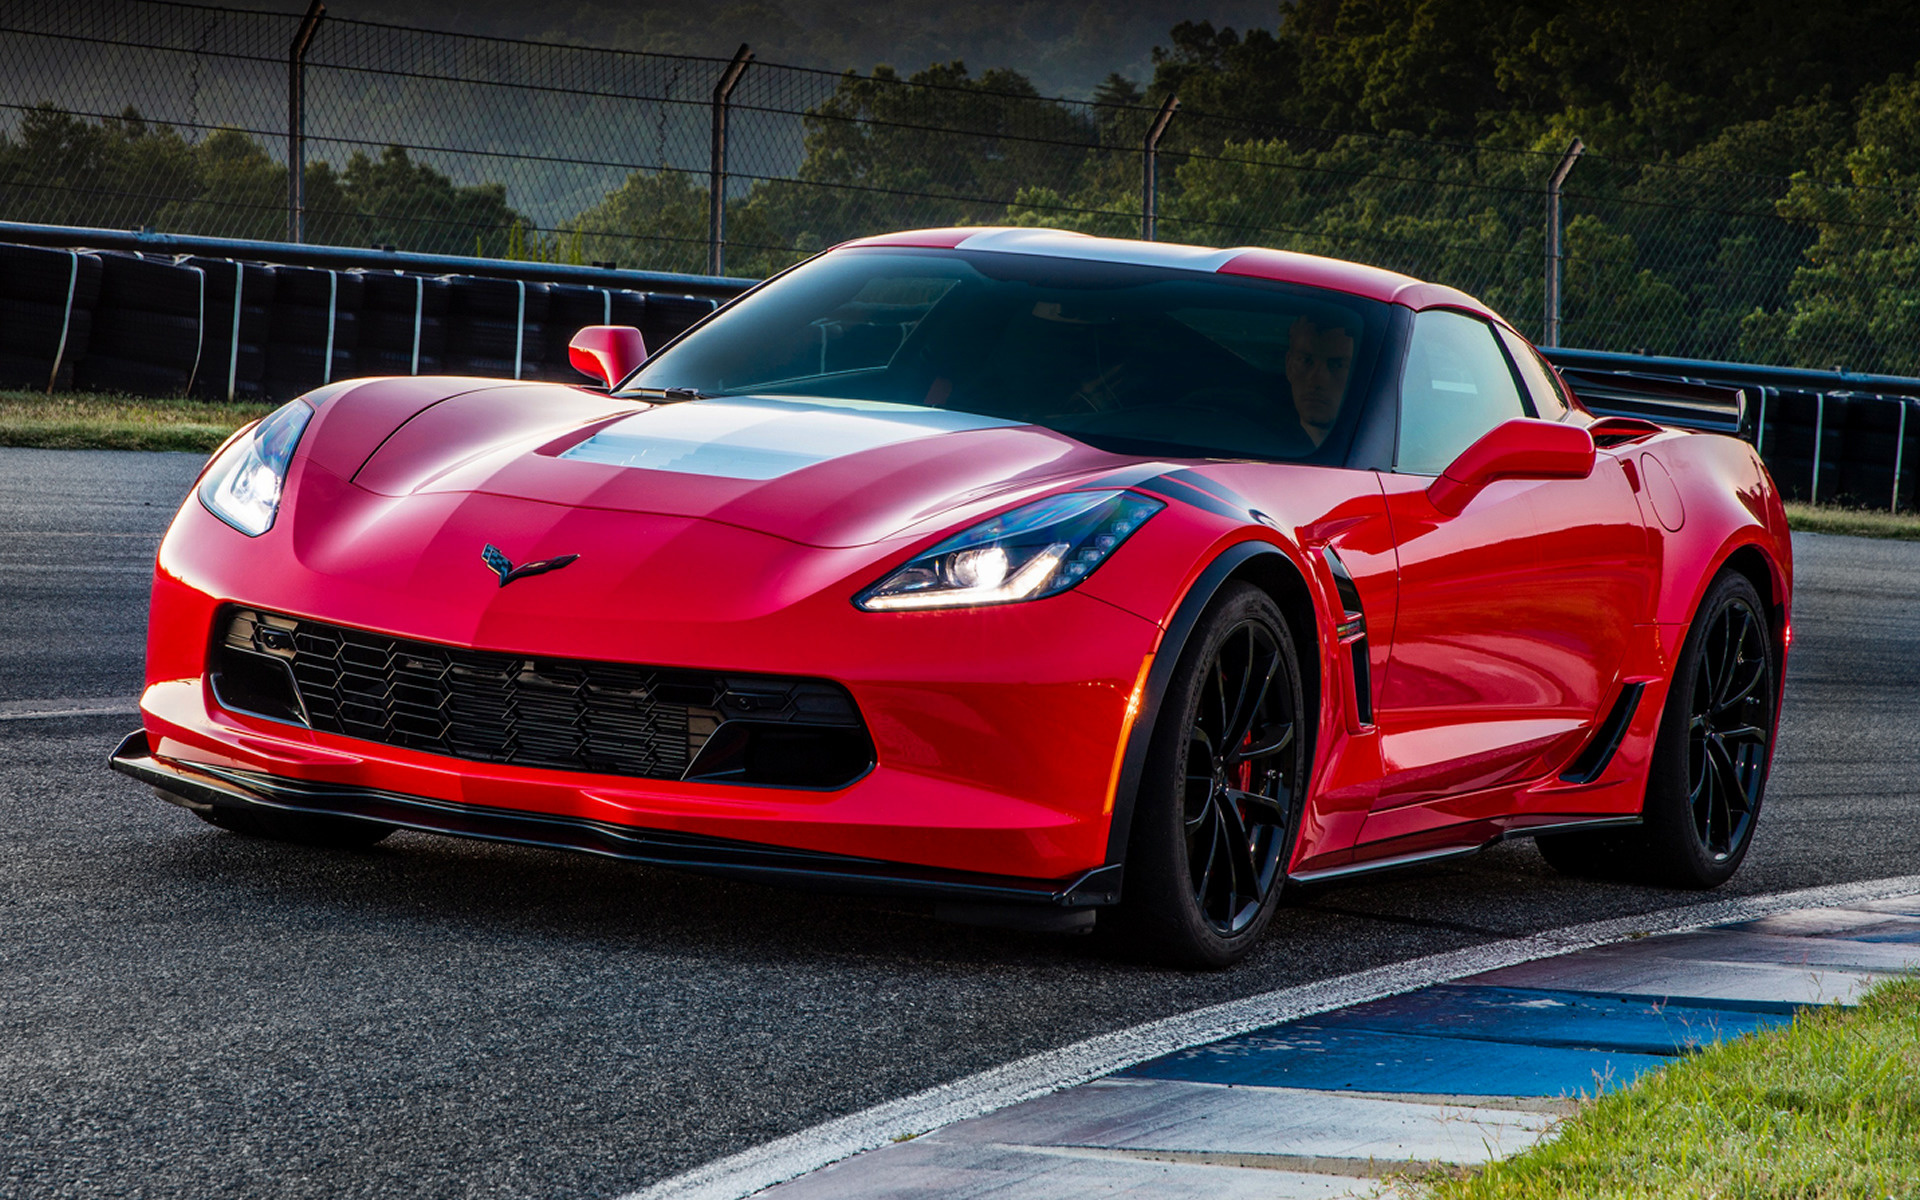 2017 Chevrolet Corvette Grand Sport - Wallpapers and HD Images | Car Pixel